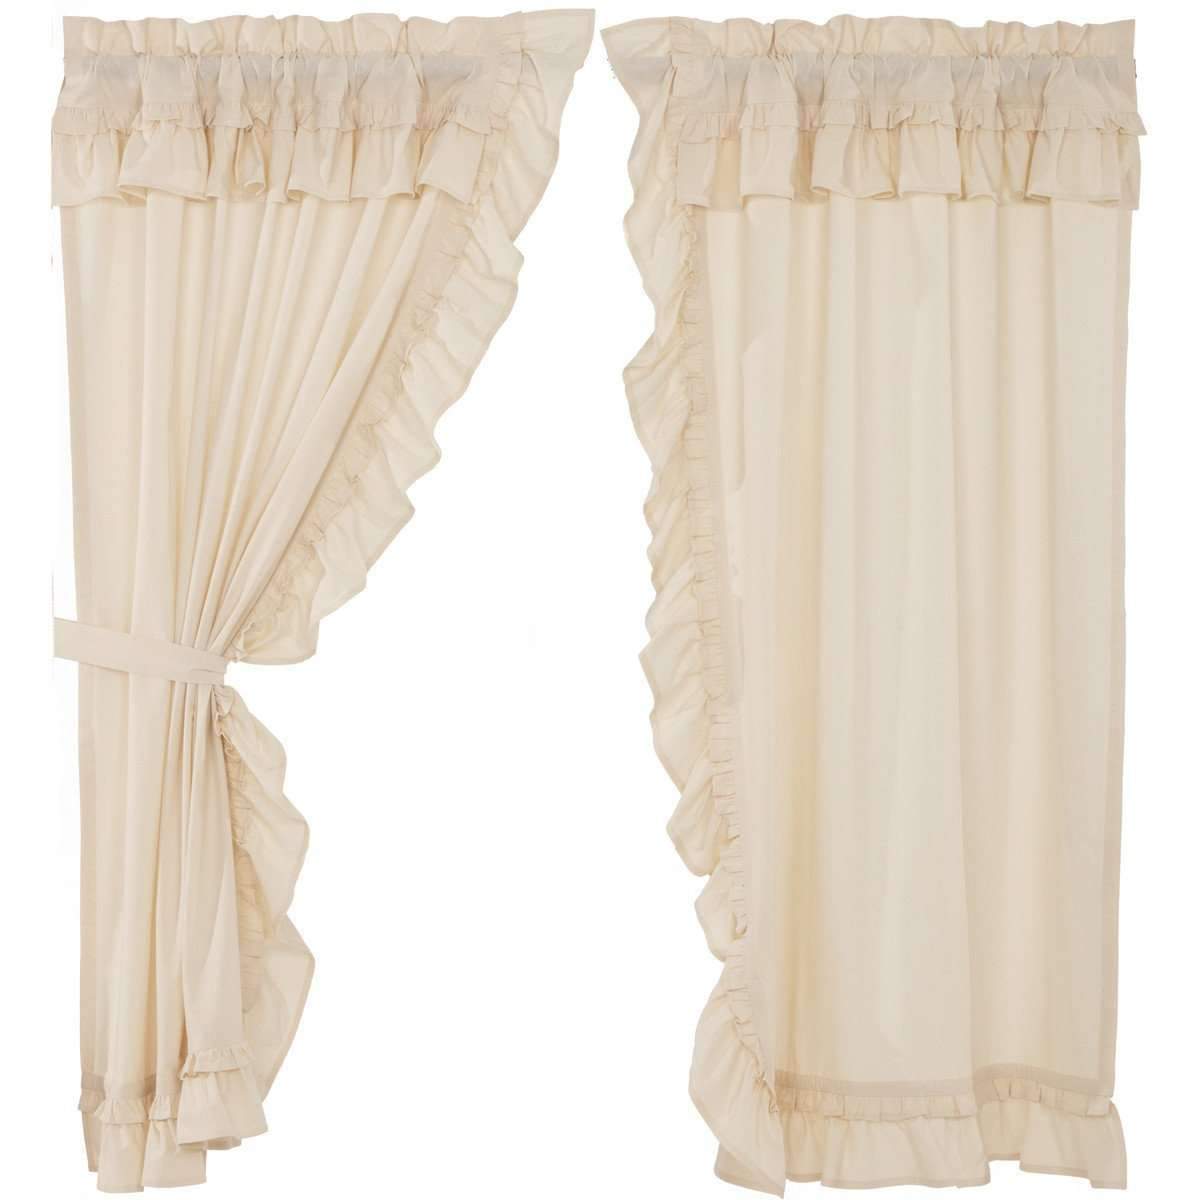 Muslin Ruffled Unbleached Natural Short Panel Curtain Set of 2 63"x36" VHC Brands - The Fox Decor